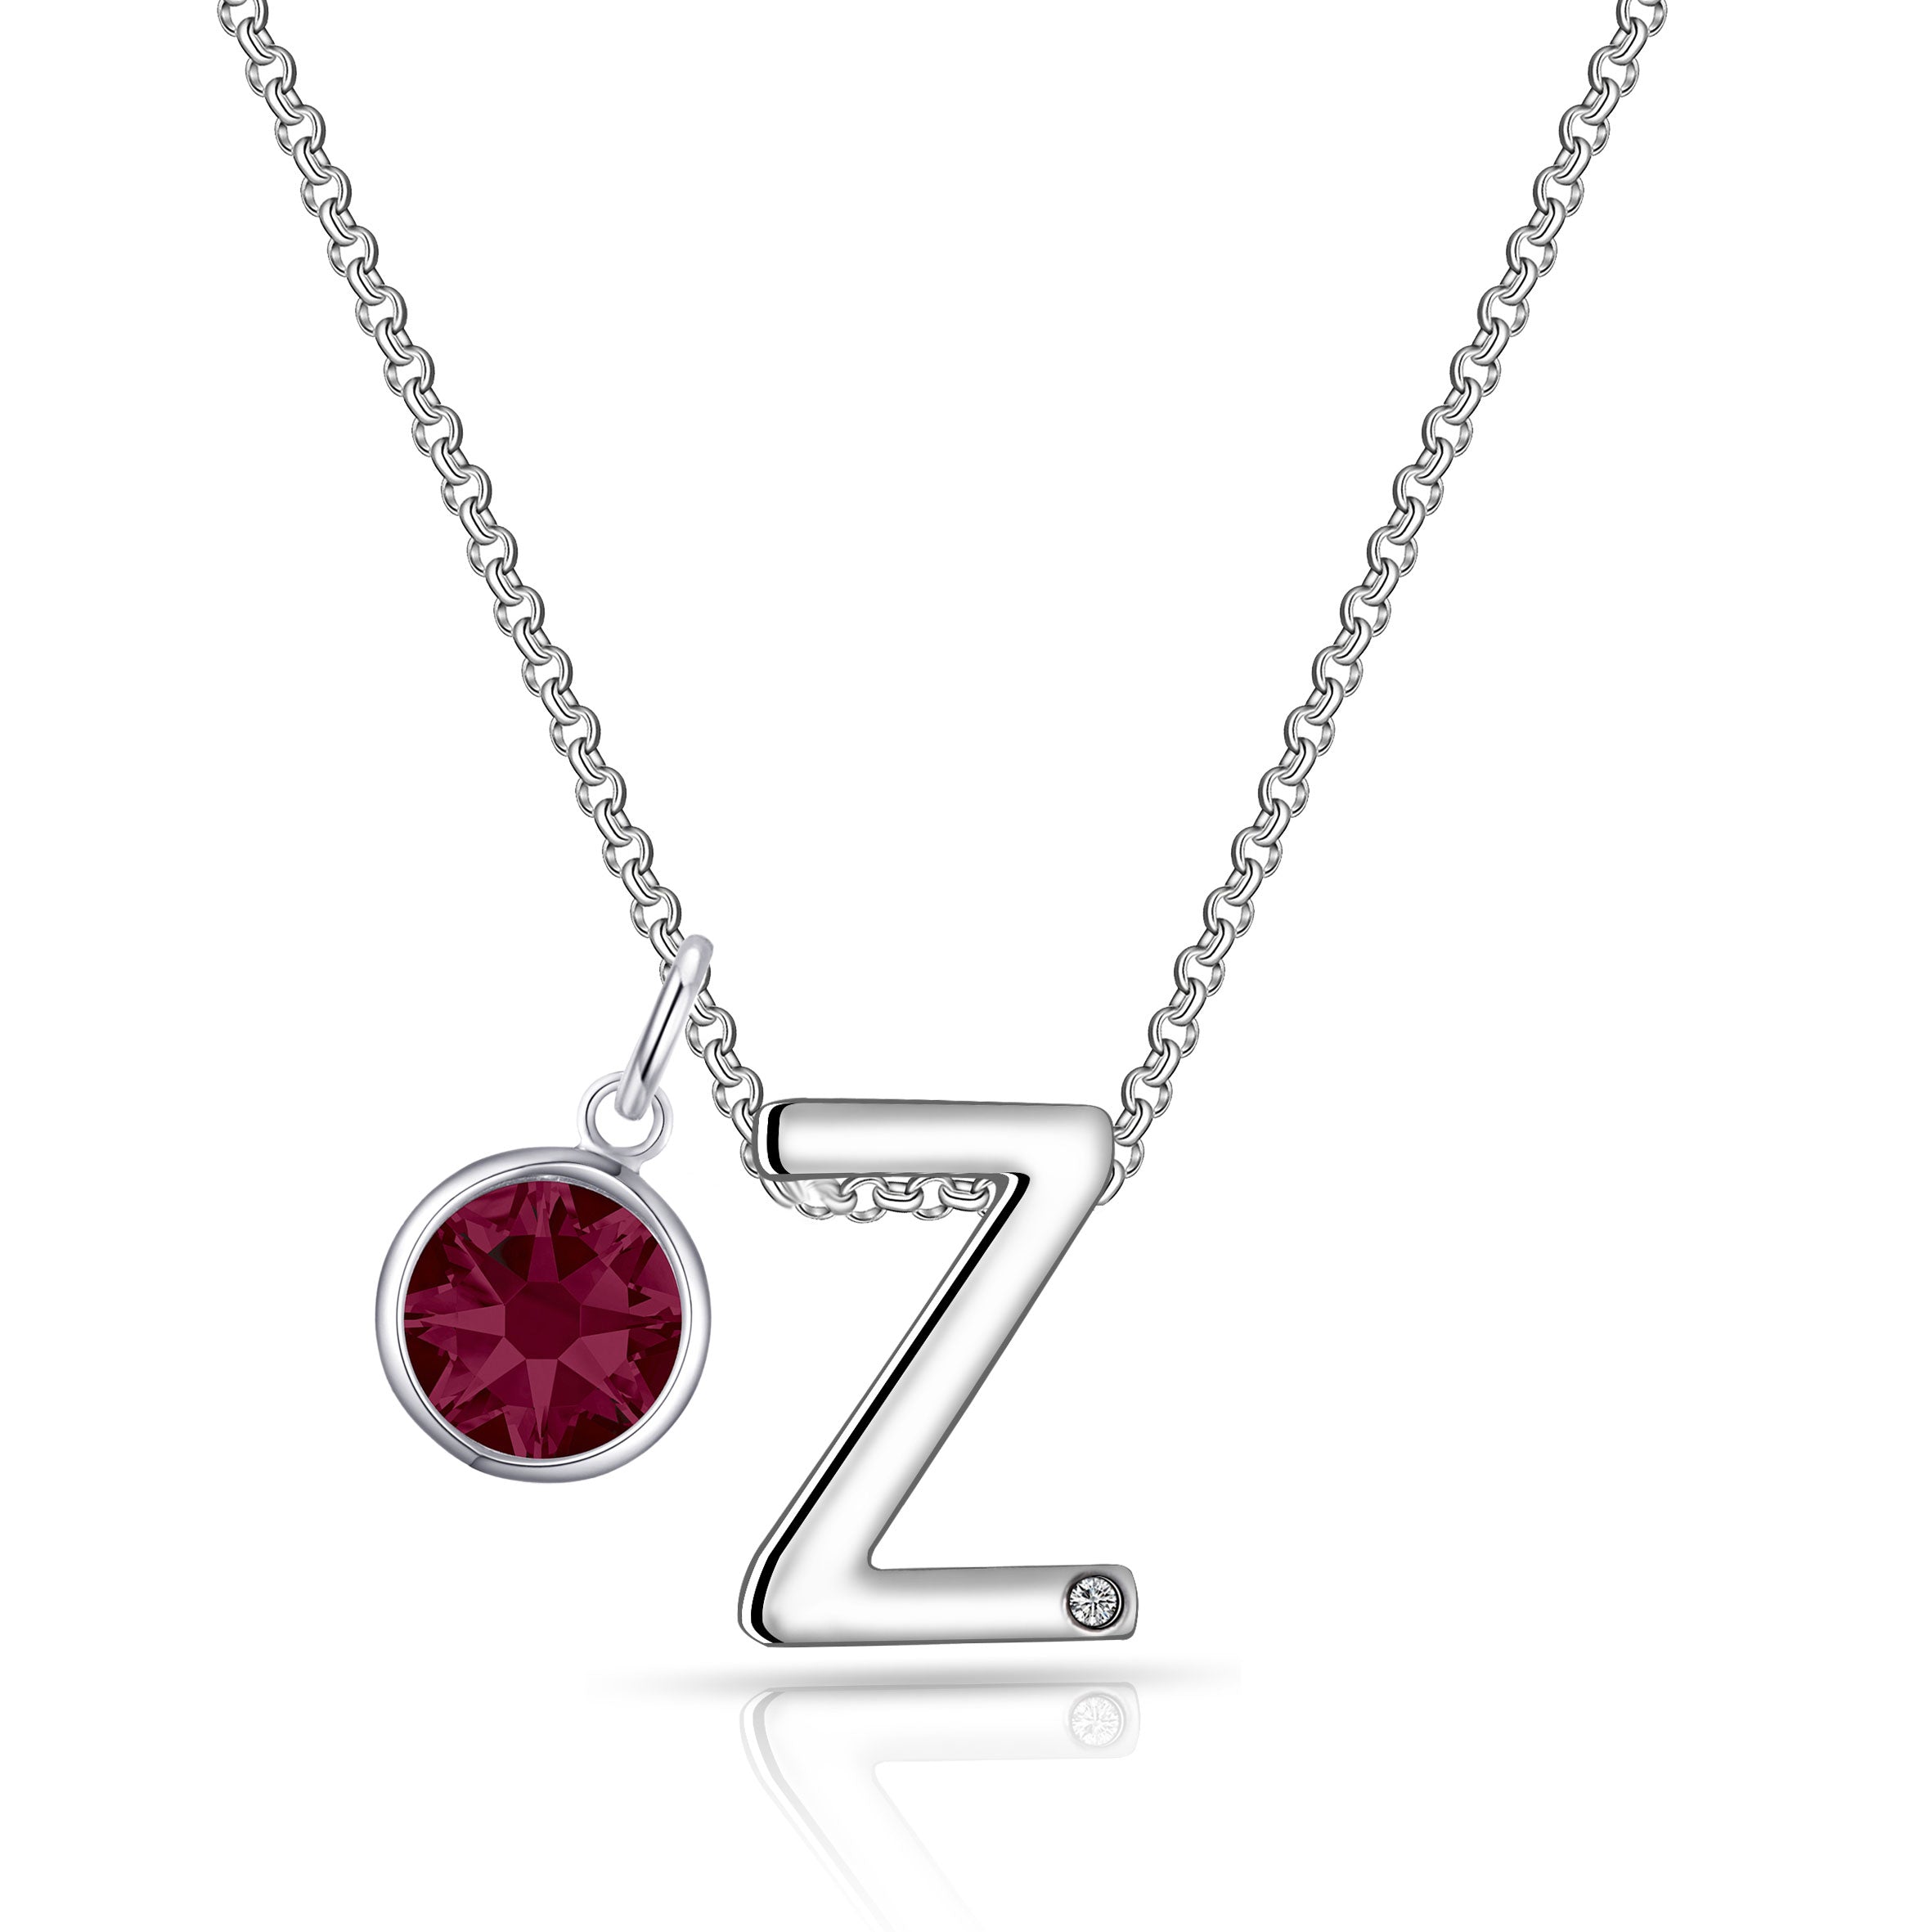 Birthstone Initial Necklace Letter Z Created with Zircondia® Crystals